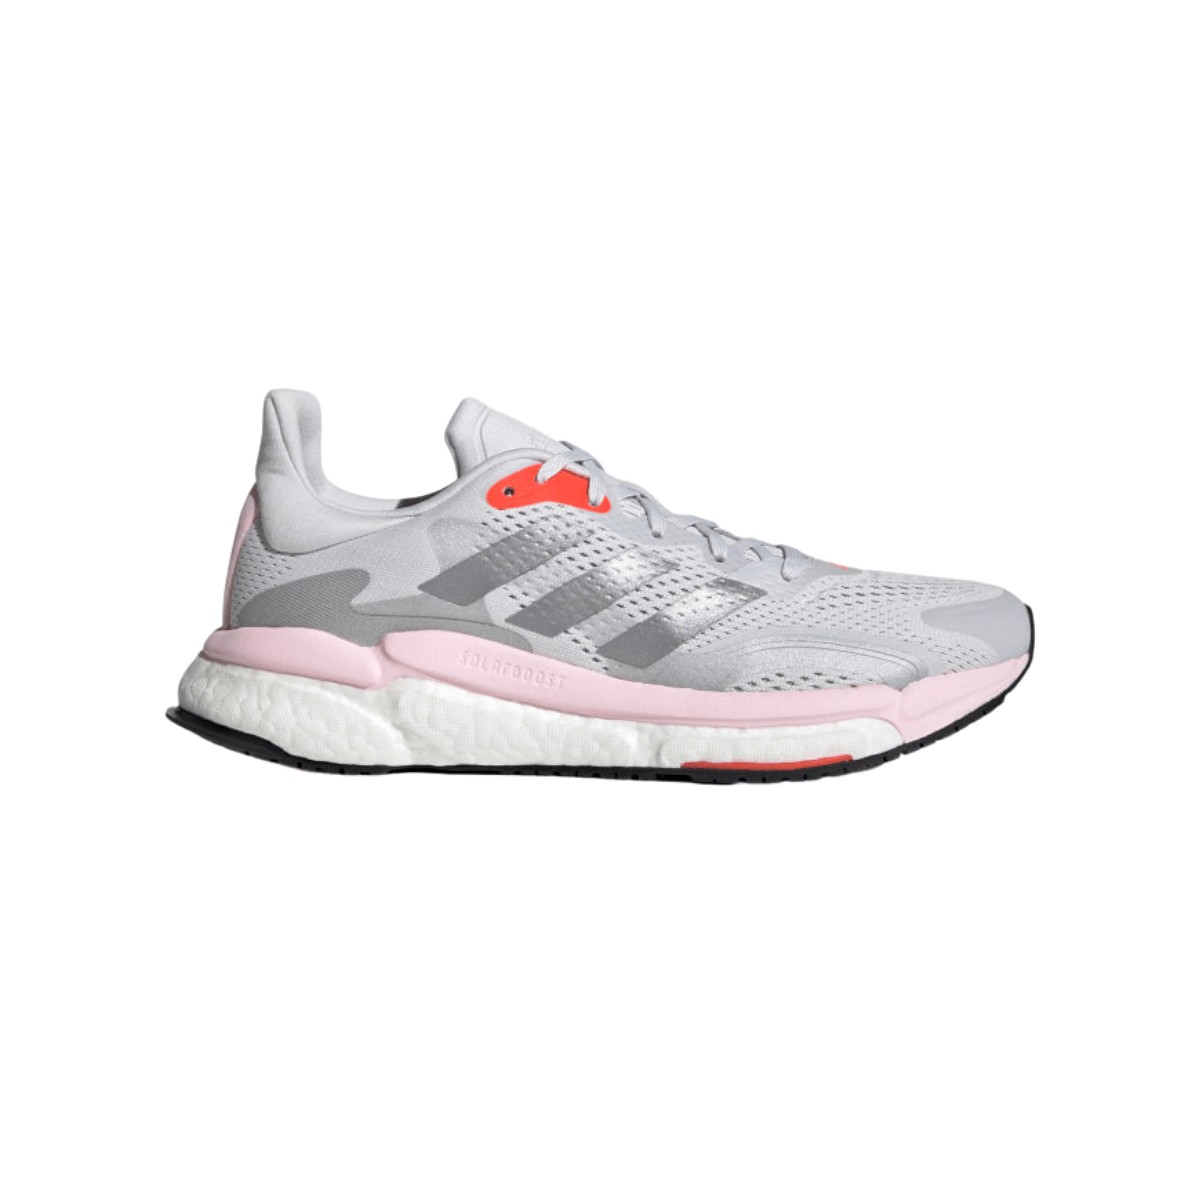 Adidas Solar Boost 3 Women's Shoes Gray Pink Red SS21, Size UK 8